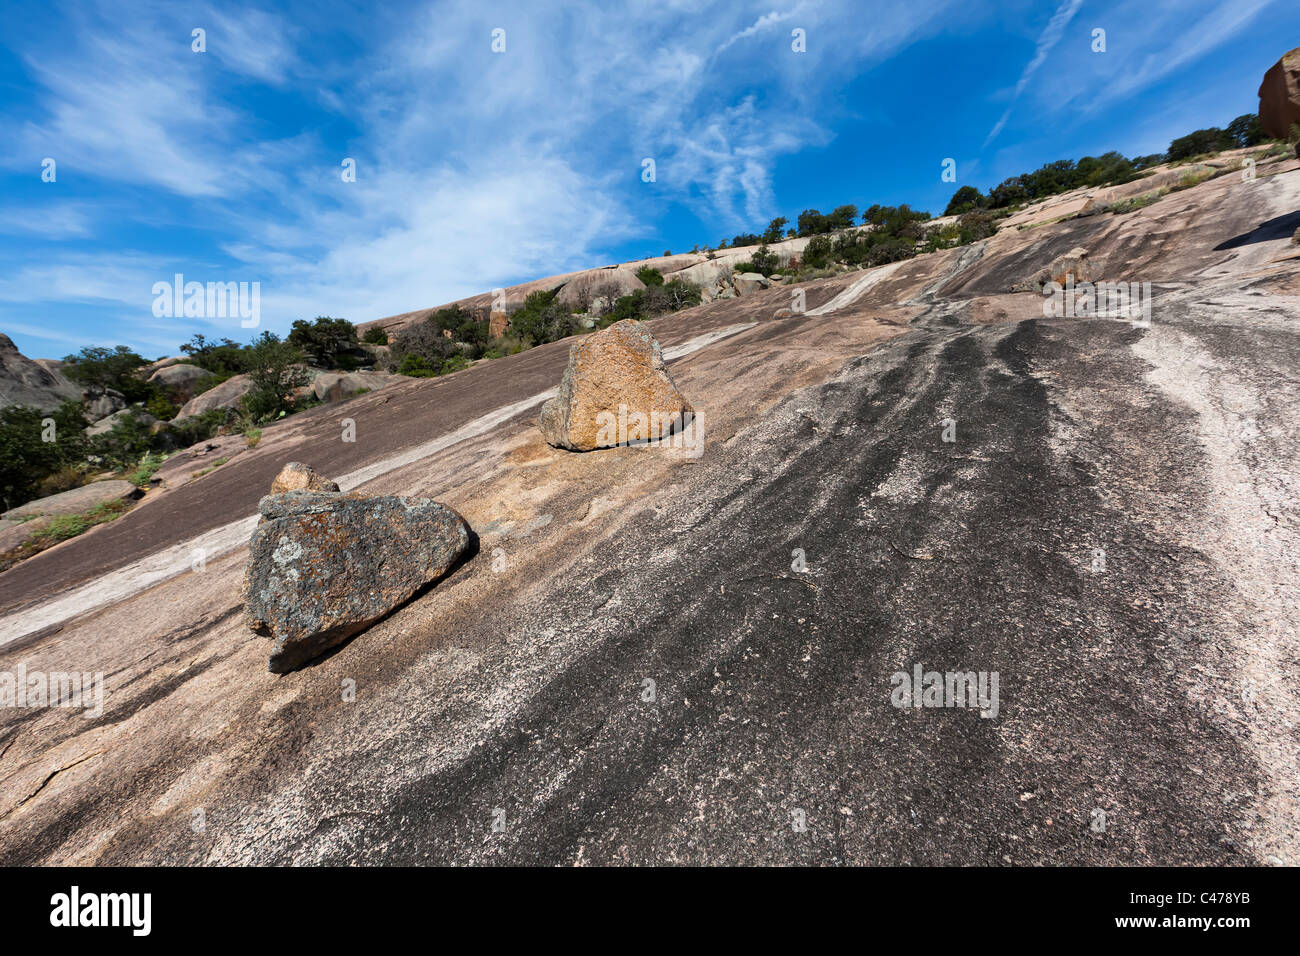 Water stained slope Enchanted Rock State Natural Area Texas USA Stock Photo